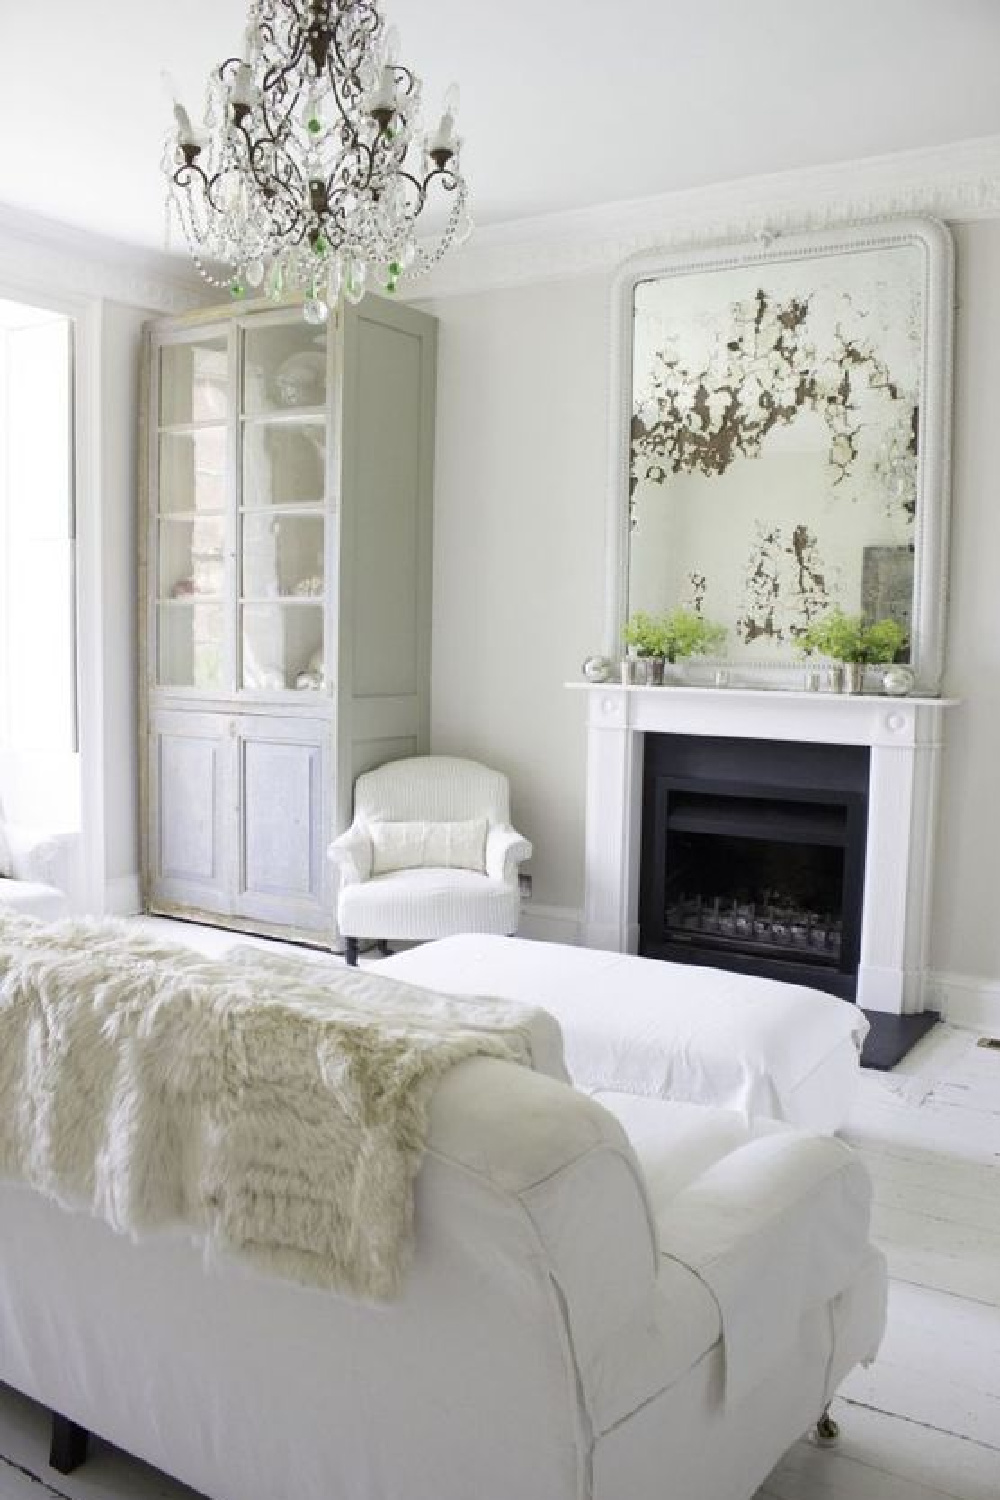 Fireplace in white on white room. Multiple shades of white mix for a glorious cloud-like interior. Scandinavian style white Nordic French design details as well as spare decor style meet English countryside charm in "The Hatch," a photographic location in Wiltshire. Design: Atlanta Bartlett & Dave Coote of the Beach Studios. 